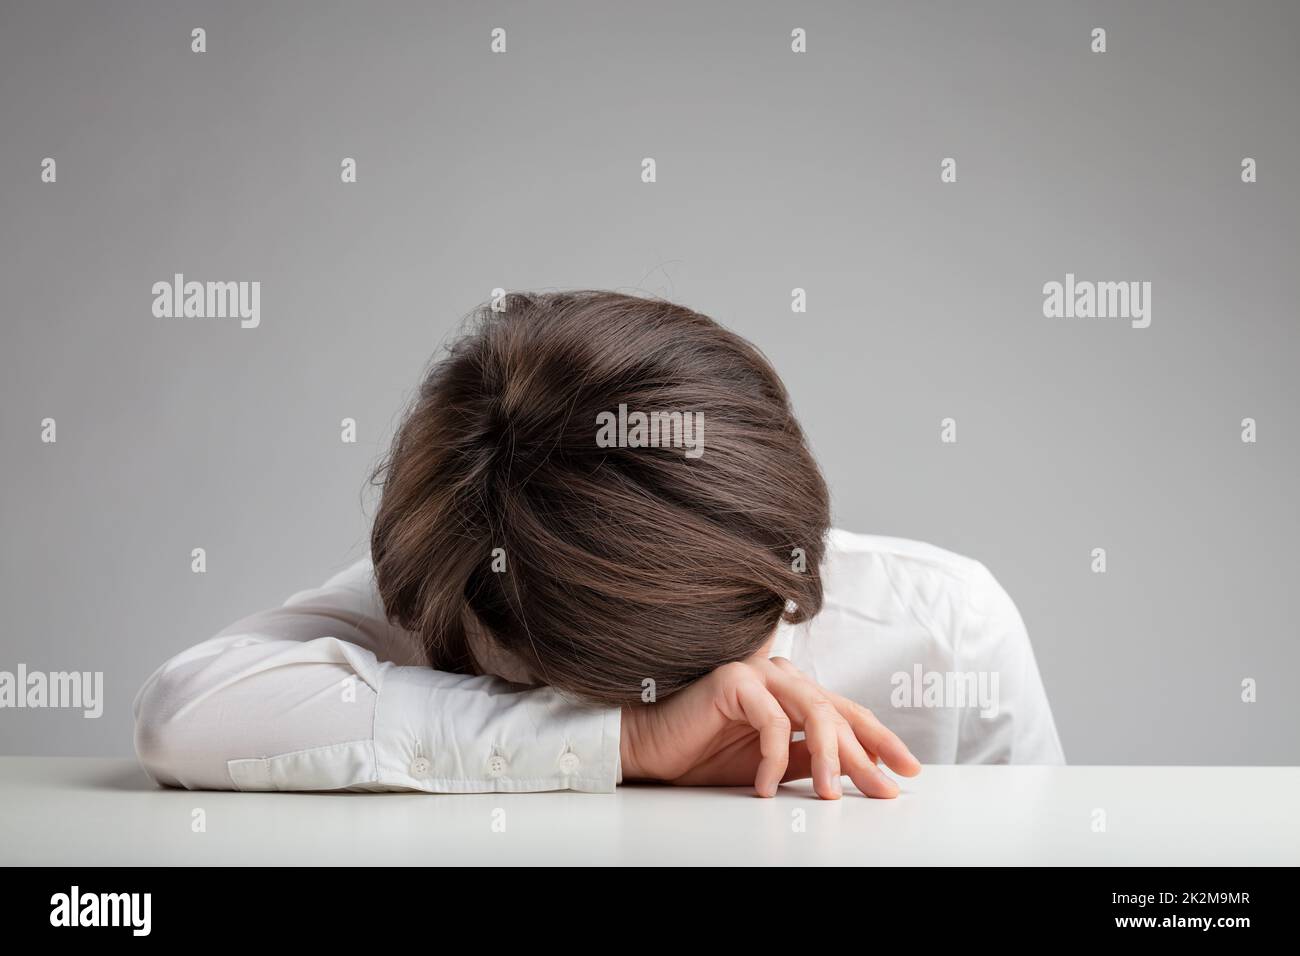 Tired, exhausted or depressed woman Stock Photo